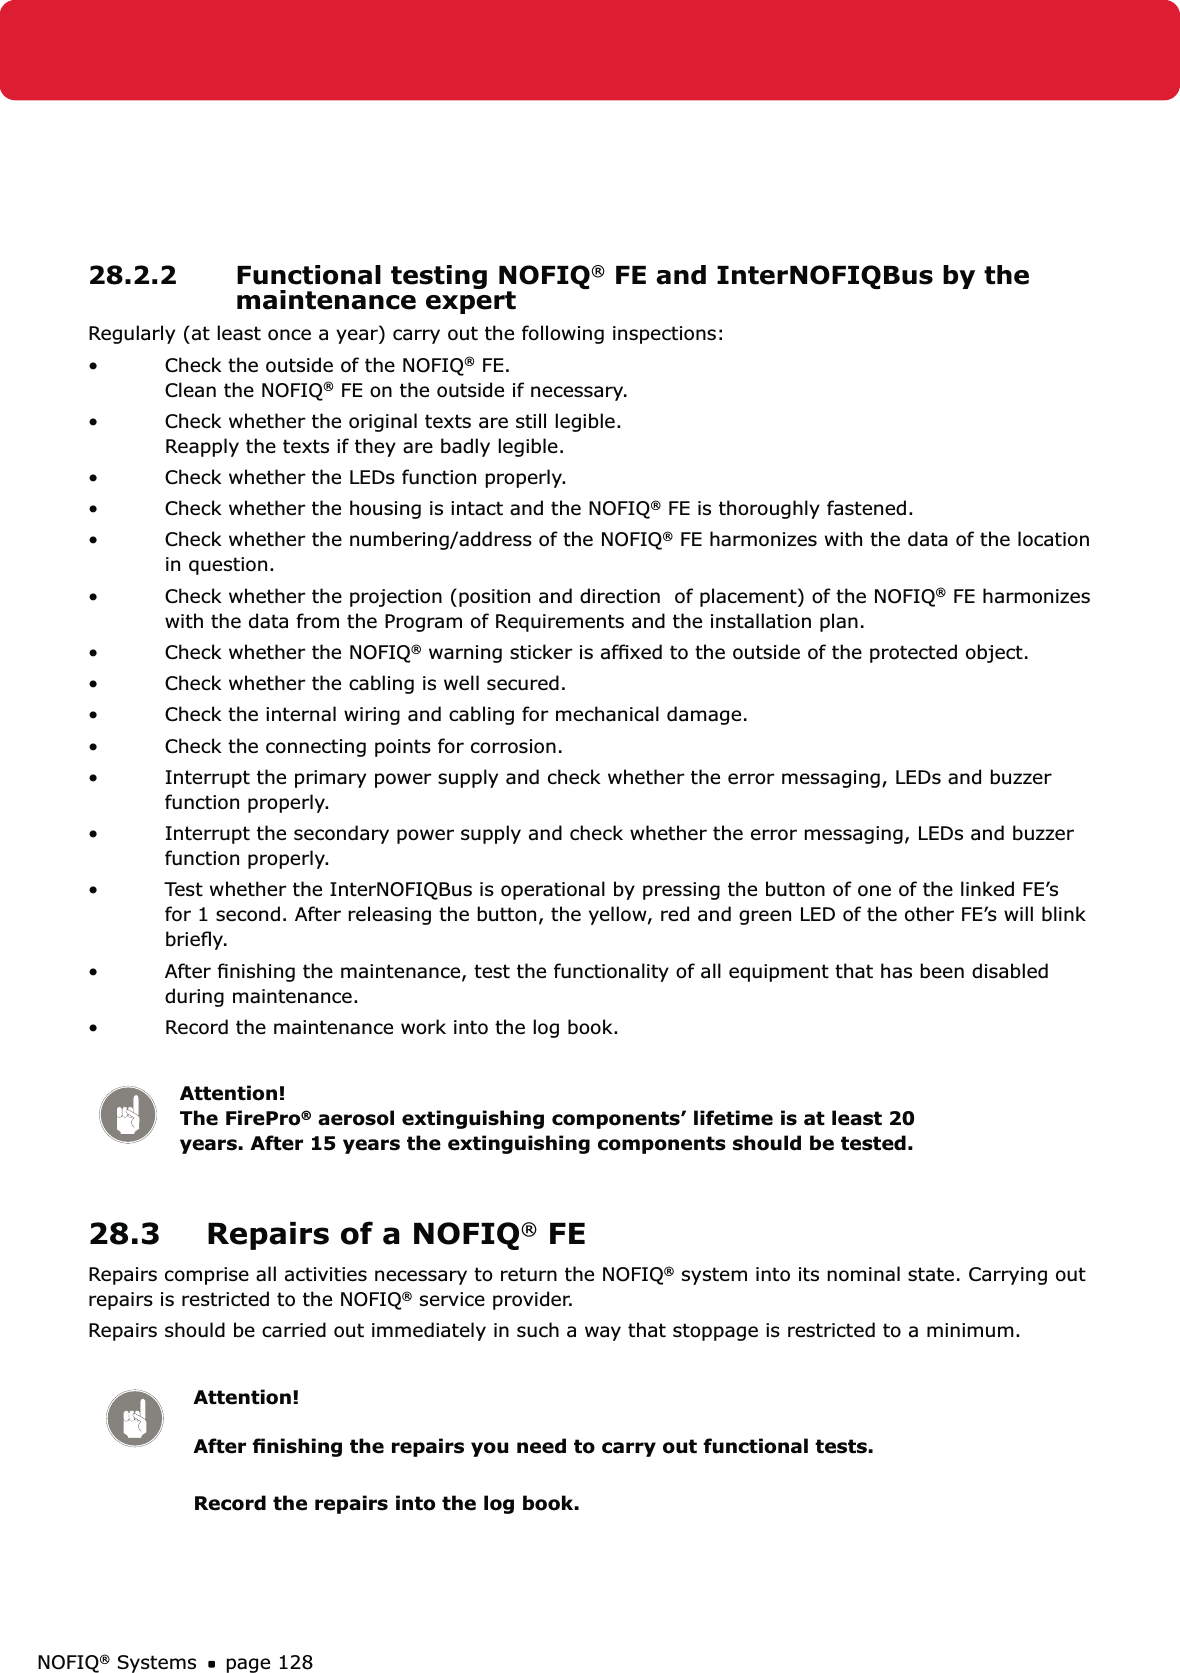 NOFIQ® Systems page 12828.2.2  Functional testing NOFIQ® FE and InterNOFIQBus by the maintenance expertRegularly (at least once a year) carry out the following inspections:Check the outside of the NOFIQ•  ® FE. Clean the NOFIQ® FE on the outside if necessary.Check whether the original texts are still legible. • Reapply the texts if they are badly legible.Check whether the LEDs function properly.• Check whether the housing is intact and the NOFIQ•  ® FE is thoroughly fastened.Check whether the numbering/address of the NOFIQ•  ® FE harmonizes with the data of the location in question.Check whether the projection (position and direction  of placement) of the NOFIQ•  ® FE harmonizes with the data from the Program of Requirements and the installation plan.Check whether the NOFIQ•  ® warning sticker is afﬁxed to the outside of the protected object. Check whether the cabling is well secured.• Check the internal wiring and cabling for mechanical damage. • Check the connecting points for corrosion.• Interrupt the primary power supply and check whether the error messaging, LEDs and buzzer • function properly.  Interrupt the secondary power supply and check whether the error messaging, LEDs and buzzer • function properly. Test whether the InterNOFIQBus is operational by pressing the button of one of the linked FE’s • for 1 second. After releasing the button, the yellow, red and green LED of the other FE’s will blink brieﬂy.After ﬁnishing the maintenance, test the functionality of all equipment that has been disabled • during maintenance. Record the maintenance work into the log book.• Attention! The FirePro® aerosol extinguishing components’ lifetime is at least 20 years. After 15 years the extinguishing components should be tested.28.3  Repairs of a NOFIQ® FERepairs comprise all activities necessary to return the NOFIQ® system into its nominal state. Carrying out repairs is restricted to the NOFIQ® service provider.Repairs should be carried out immediately in such a way that stoppage is restricted to a minimum. Attention!  After ﬁnishing the repairs you need to carry out functional tests. Record the repairs into the log book.